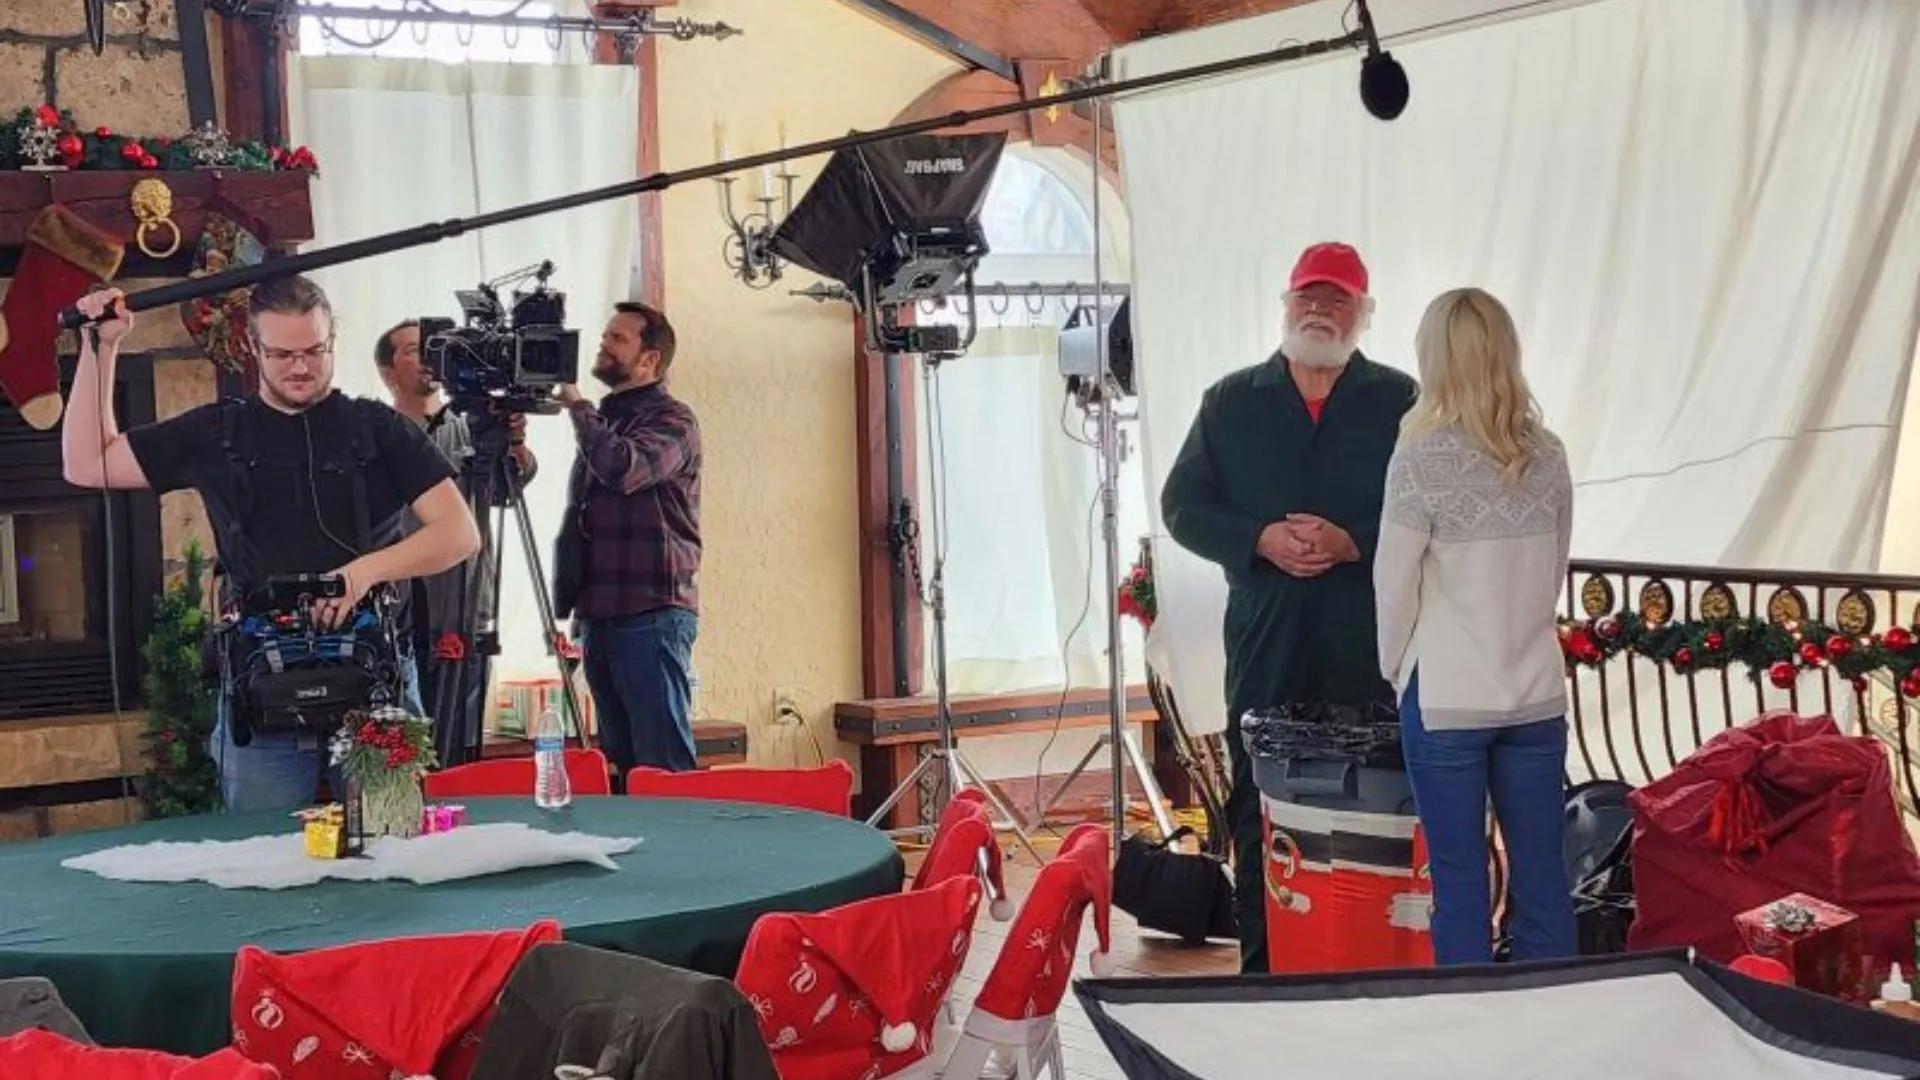 Utah The Surprising Hub for Hallmark-esque Movie Filming and Production